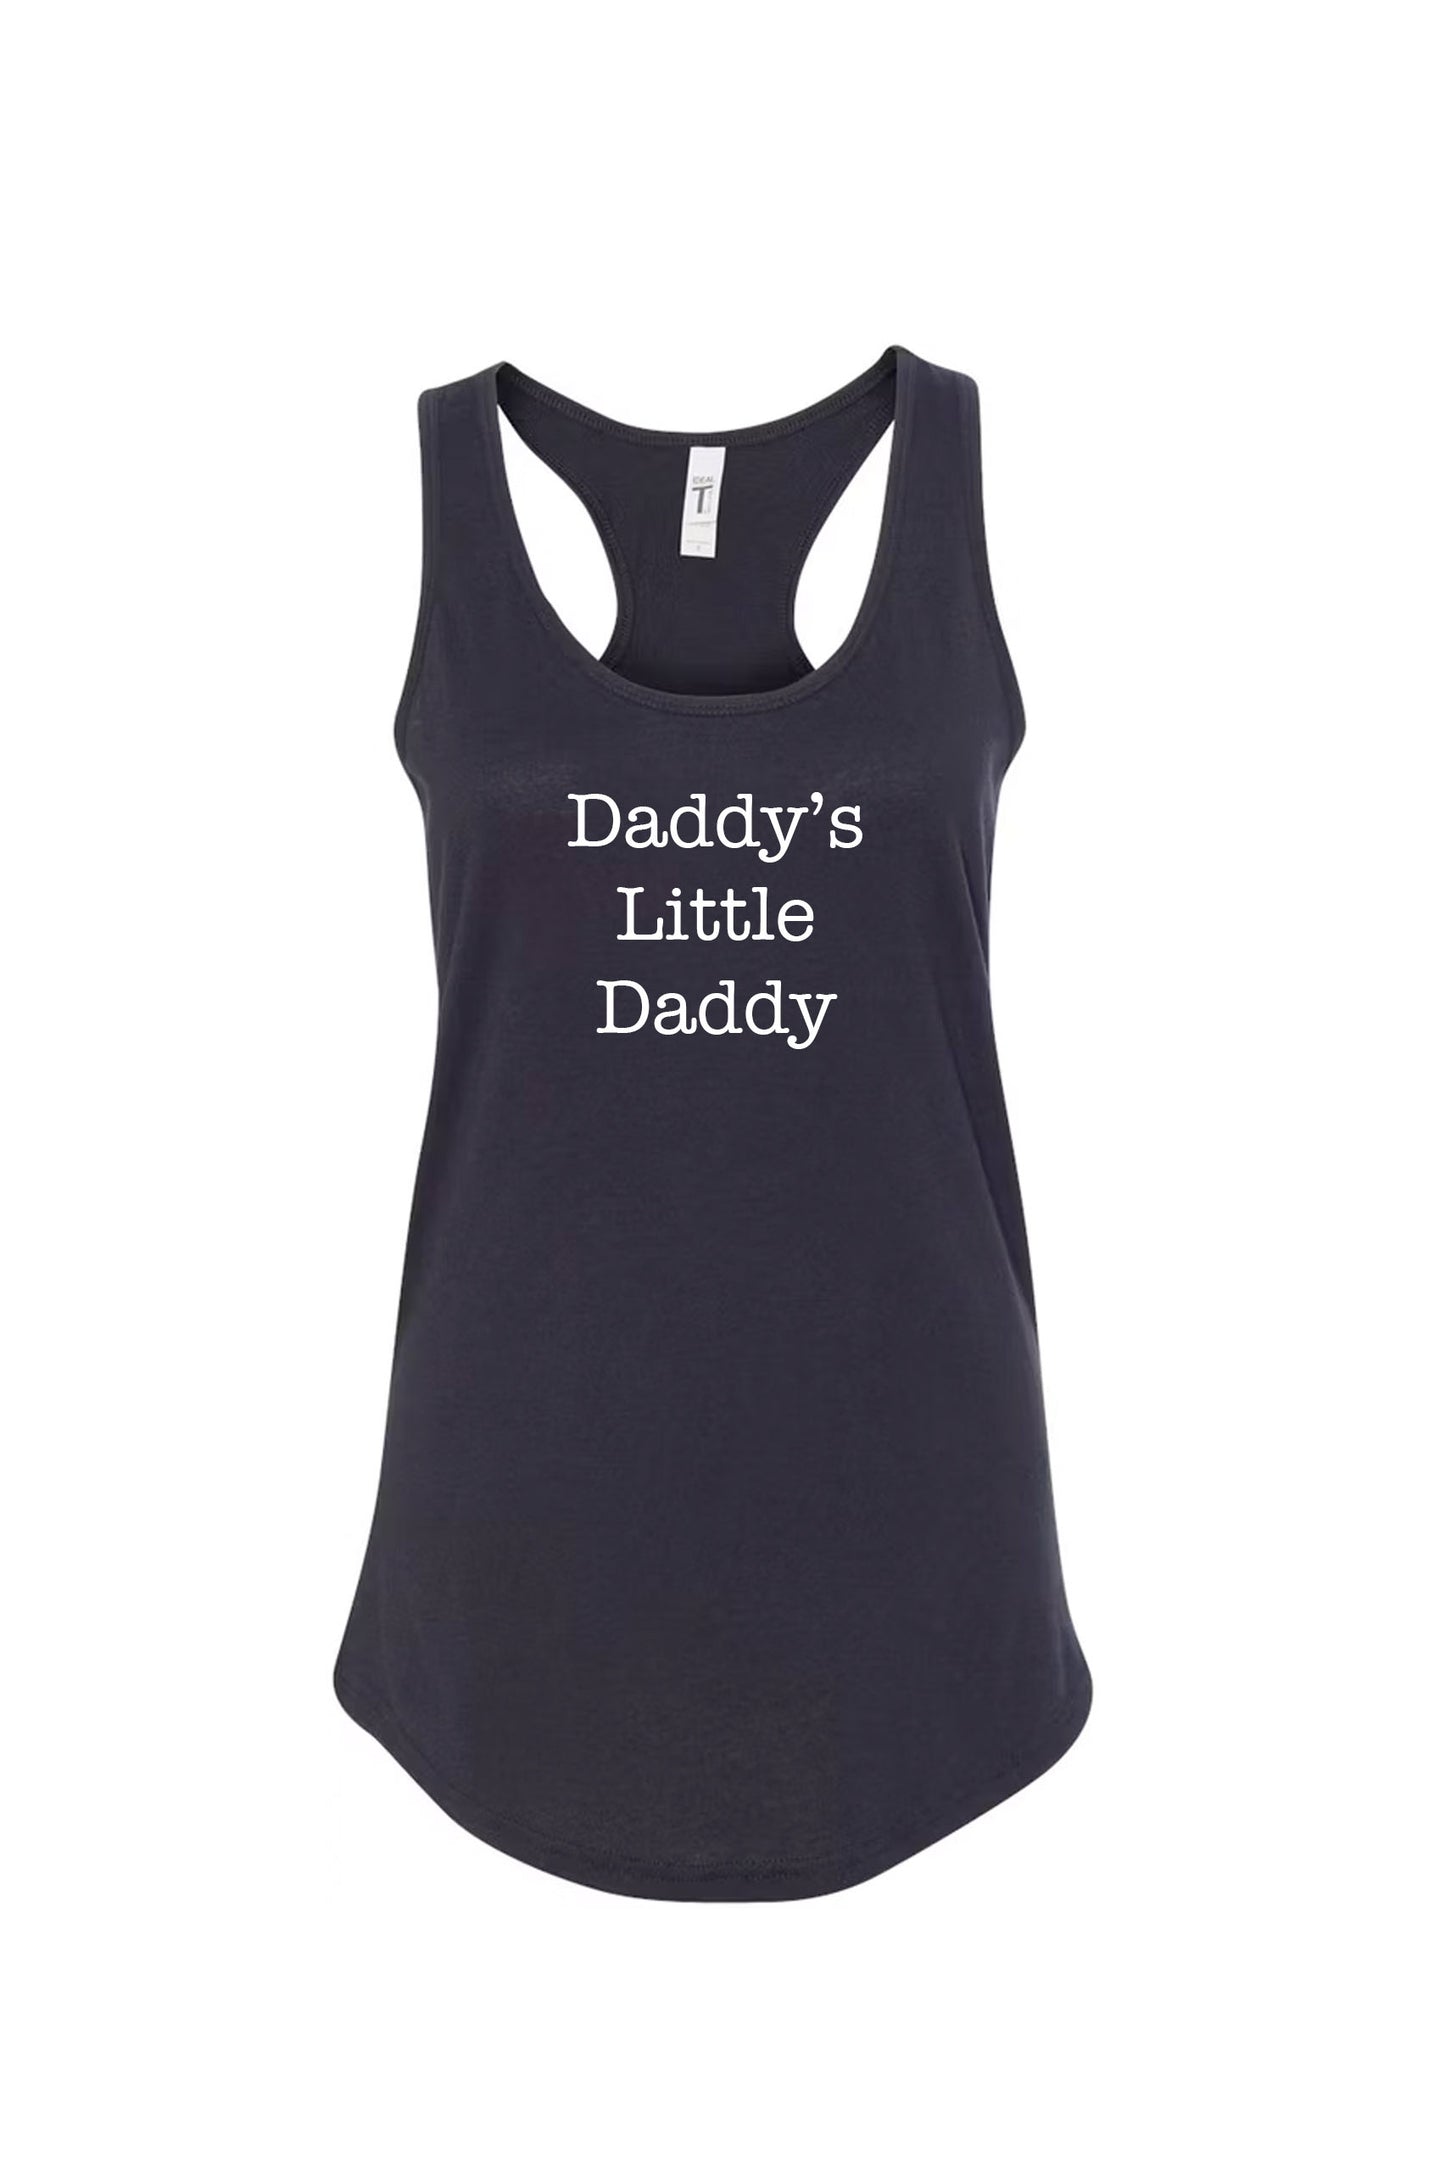 Daddy's Little Daddy Tank